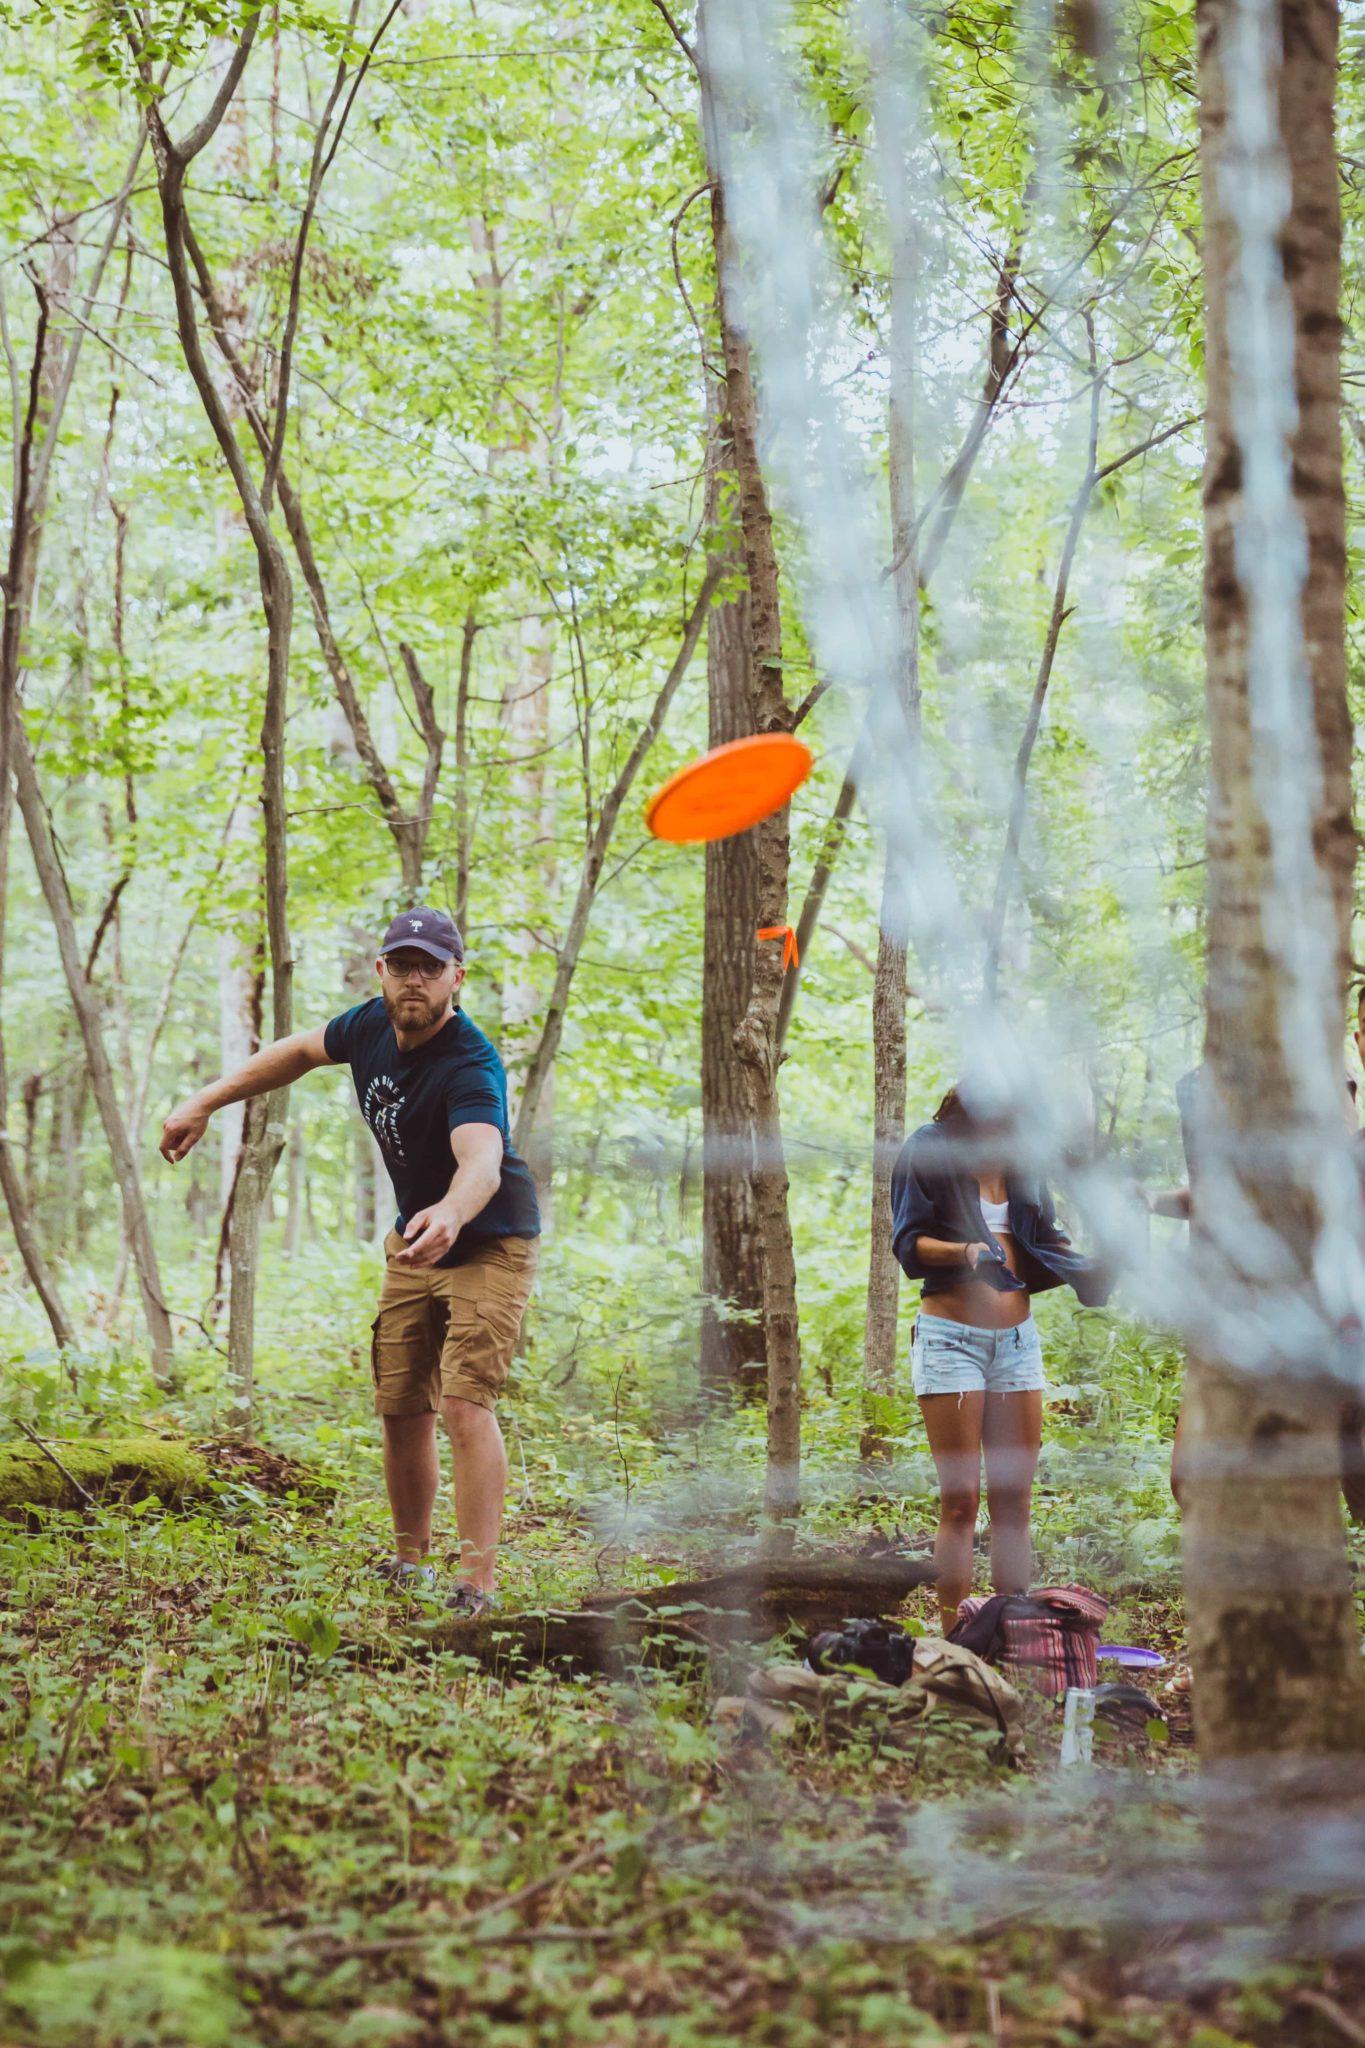 Playing disc golf in woods